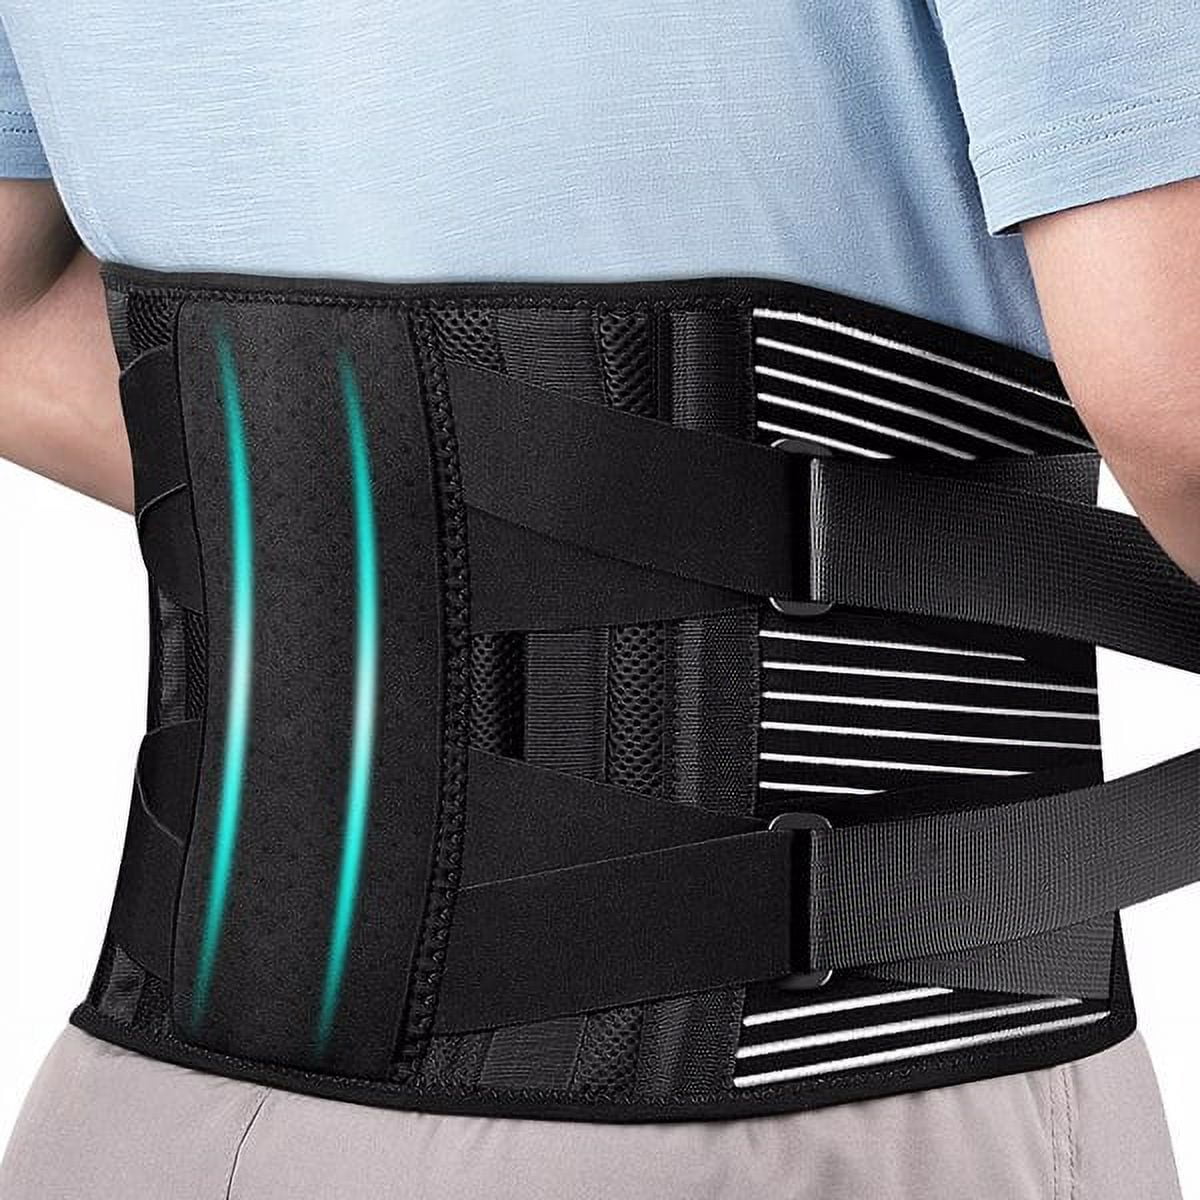  Bracepost Ergonomic Back Brace for Lower Back Pain Relief, 5  Stays, Breathable Back Support Belt for Women Men, Adjustable Lumbar Support  for Herniated Disc, Sciatica, Scoliosis (Size: X-Small) : Health 